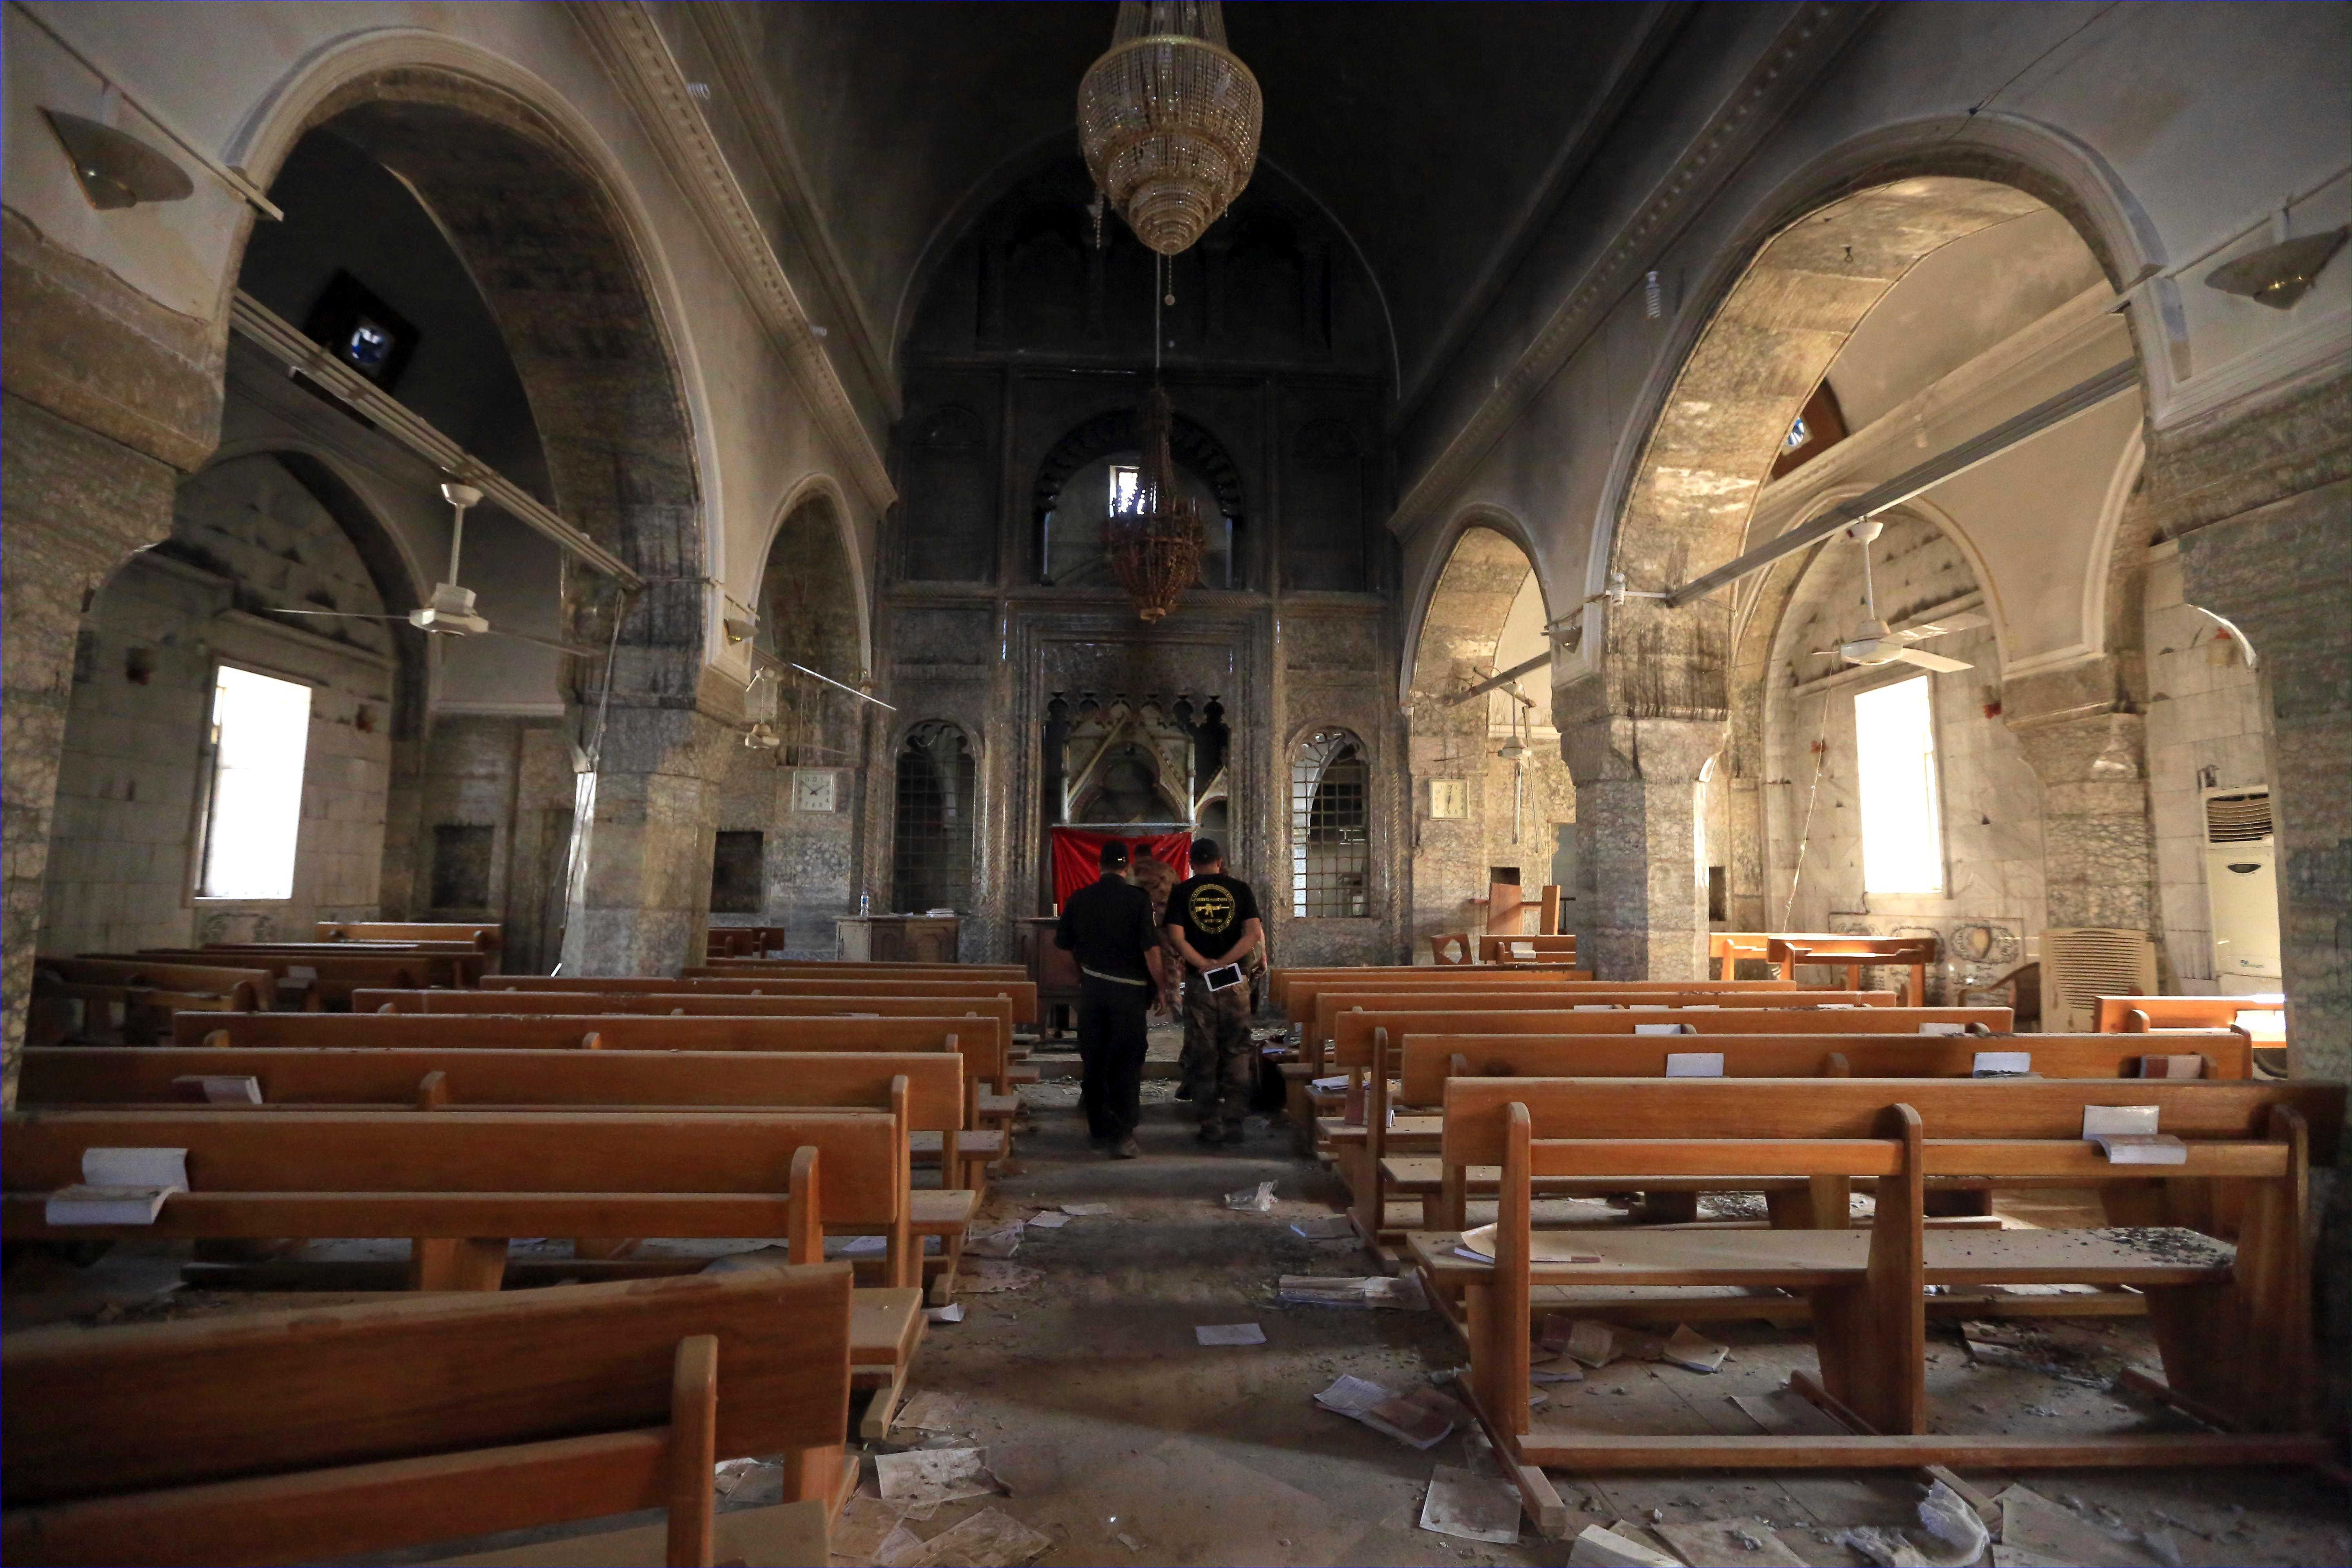 Iraq's elite counterterrorism forces inspect the church of Saint Shmoni, damaged by Islamic State fighters, in Bartella, Iraq, on Oct. 23, 2016. (AP/Khalid Mohammed)